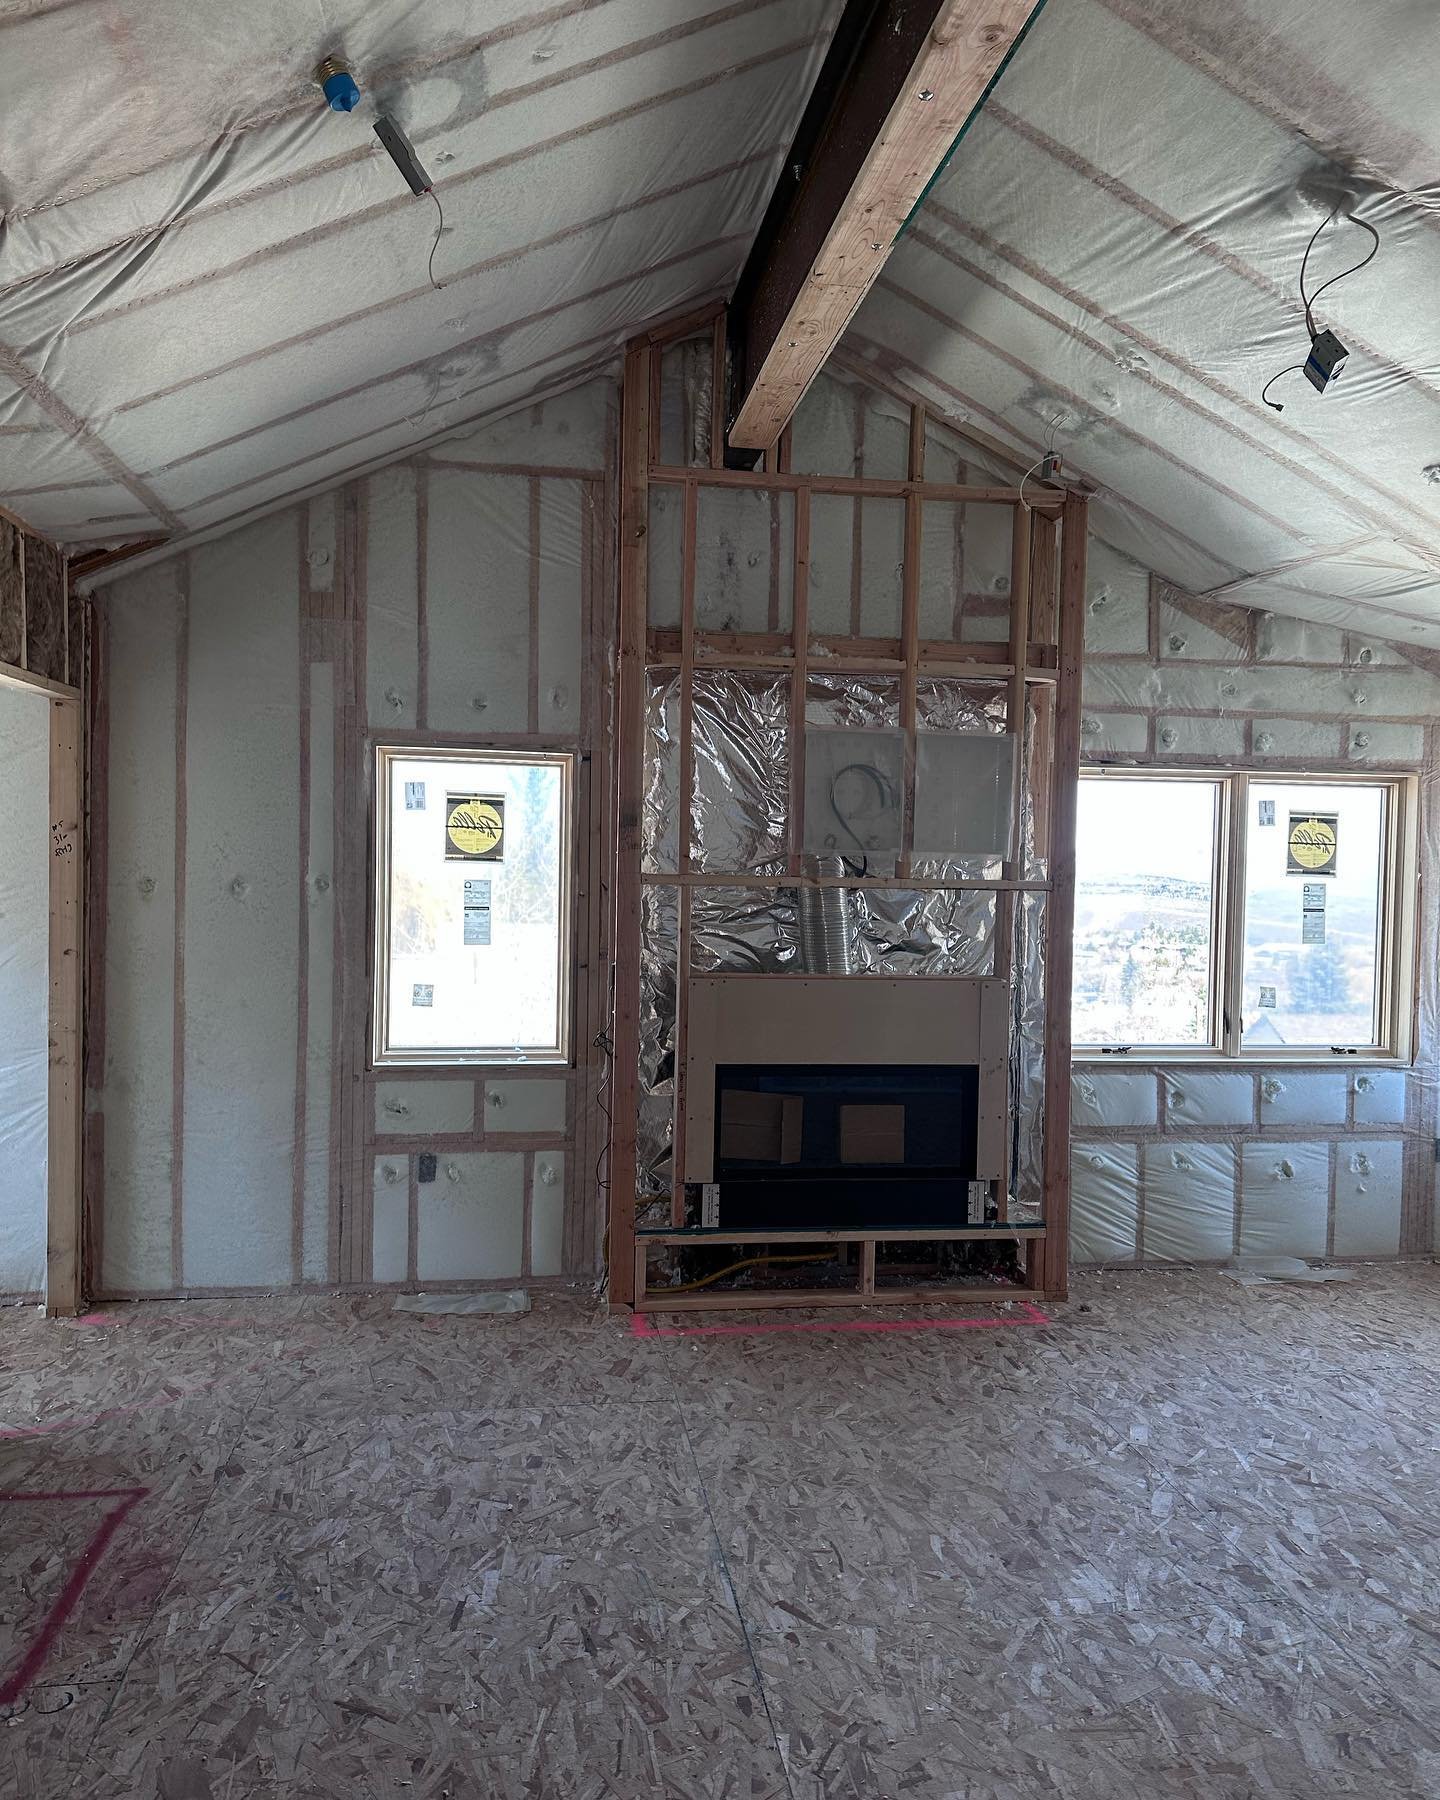 🦫 This project is cruising along 😎 watch this space as we turn this for construction, to a cozy home for our client! 💯

#utah #beaverconstructionut #slc #skiinskiout #remodel #construction #cozy #residential #commercial